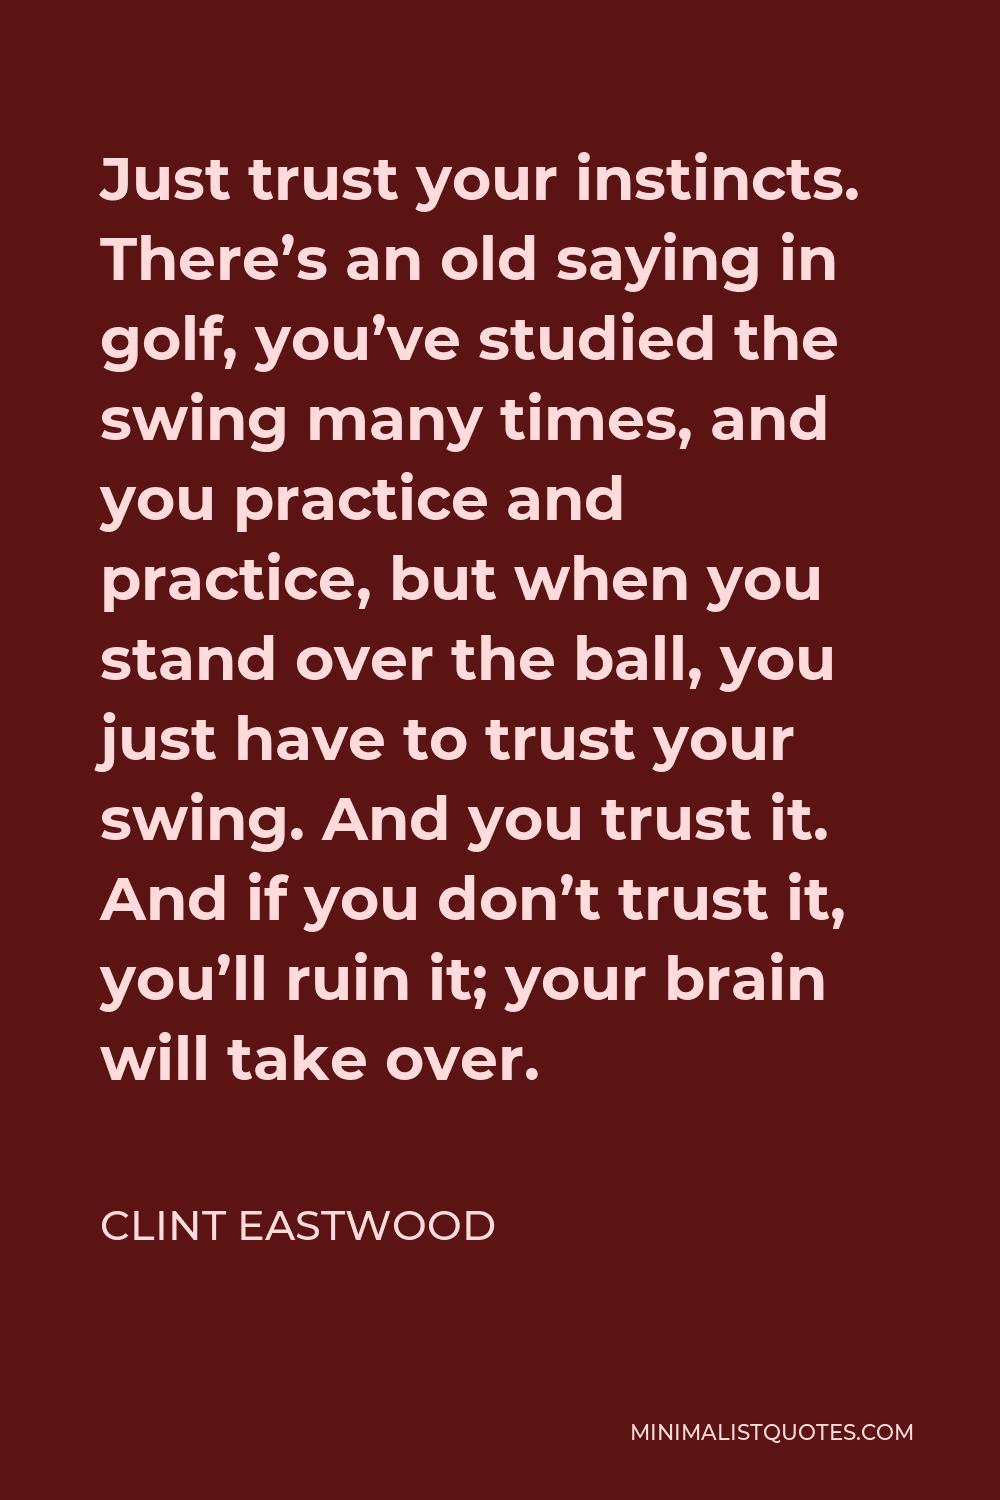 Clint Eastwood Quote - Just trust your instincts. There’s an old saying in golf, you’ve studied the swing many times, and you practice and practice, but when you stand over the ball, you just have to trust your swing. And you trust it. And if you don’t trust it, you’ll ruin it; your brain will take over.